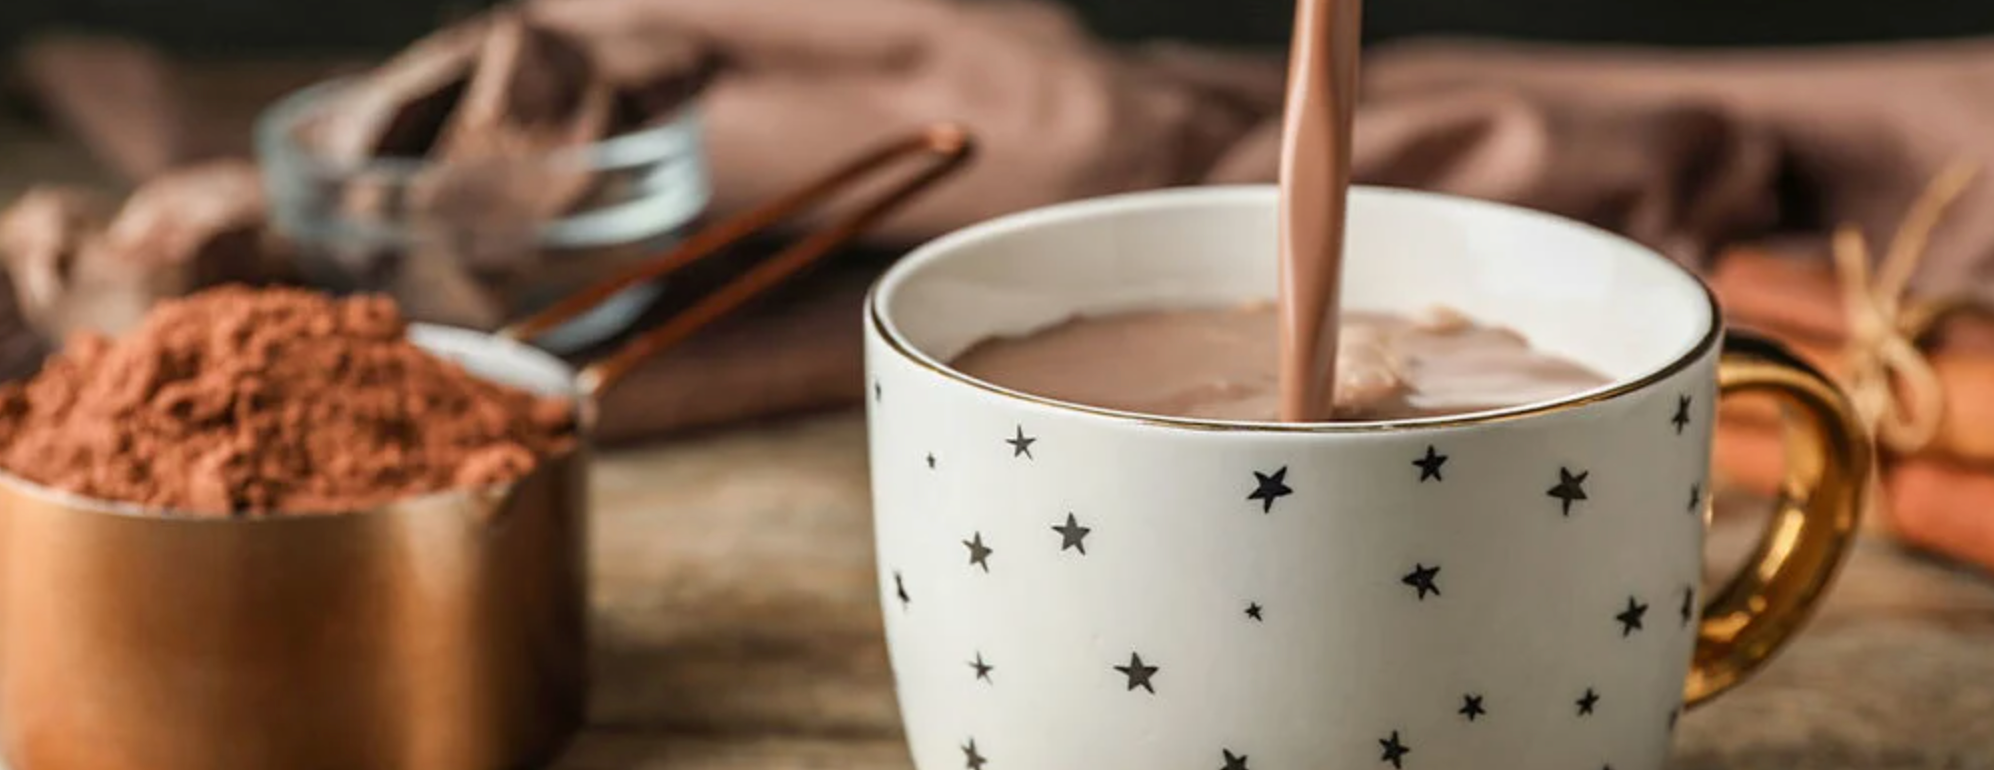 Enhance Your Nightly Routine with L-Theanine in Mushroom Sleep Hot Chocolate